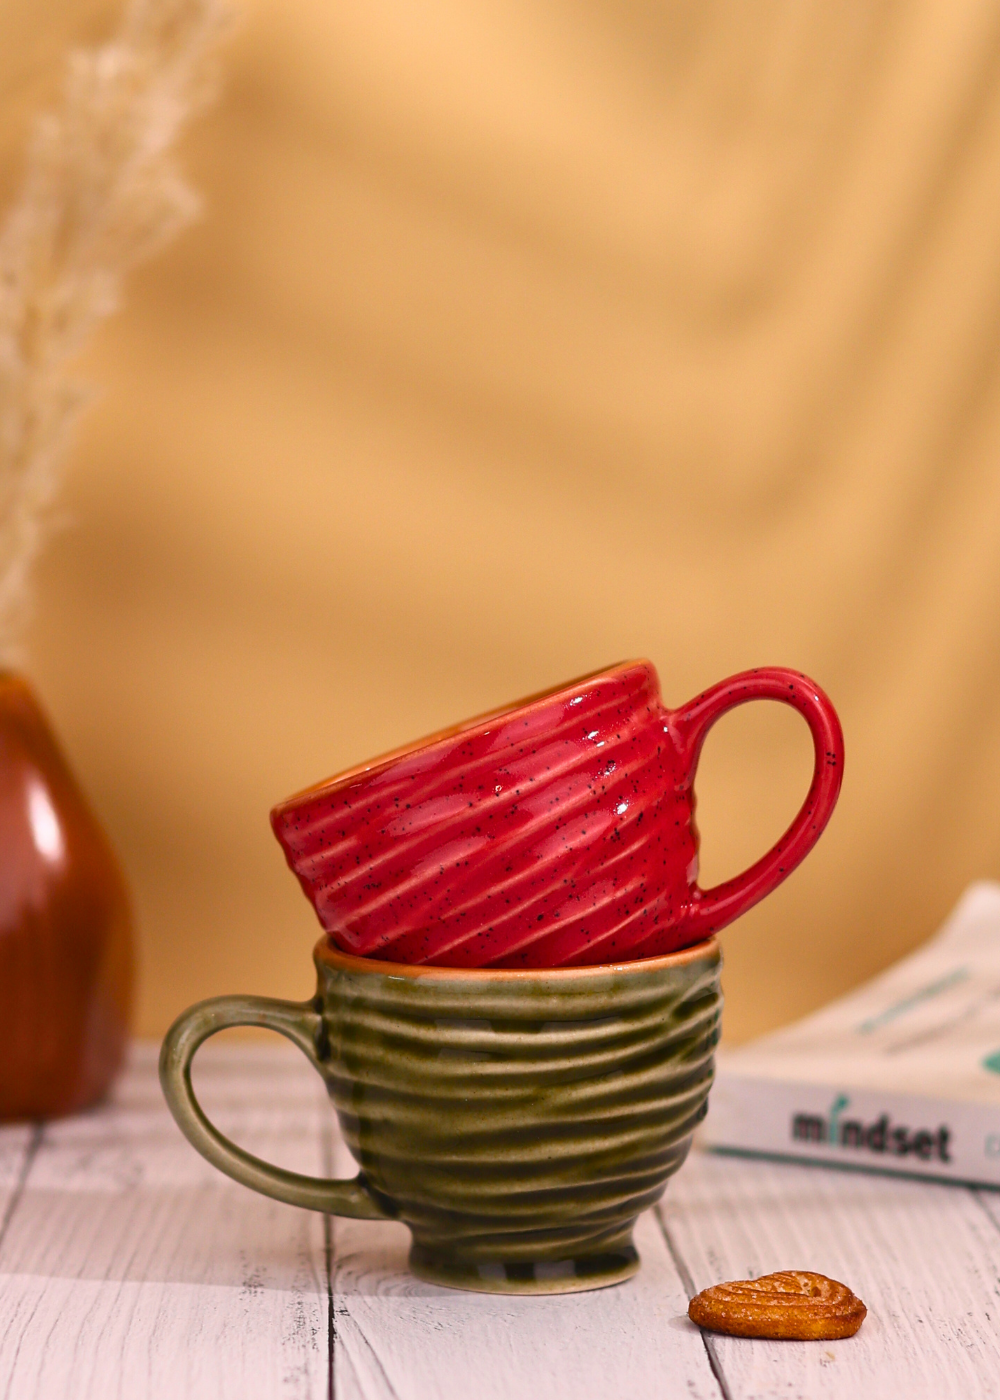 red & green torrent chai cup made by ceramic 